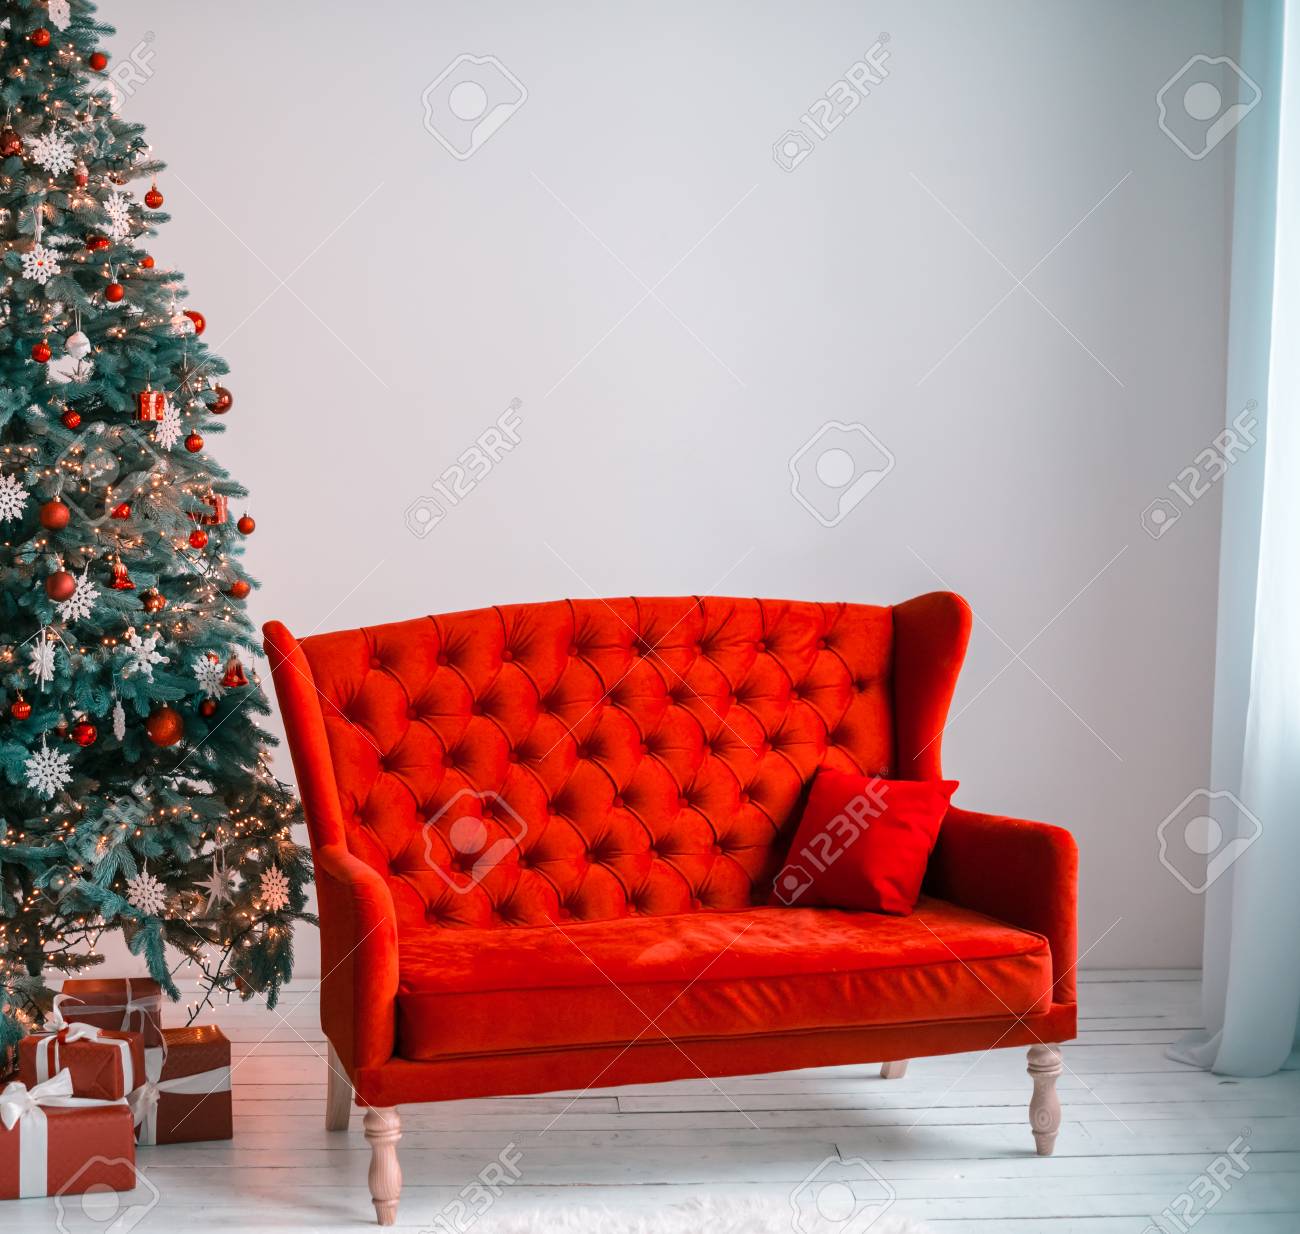 Beautiful Background Christmas Living Room With Decorated